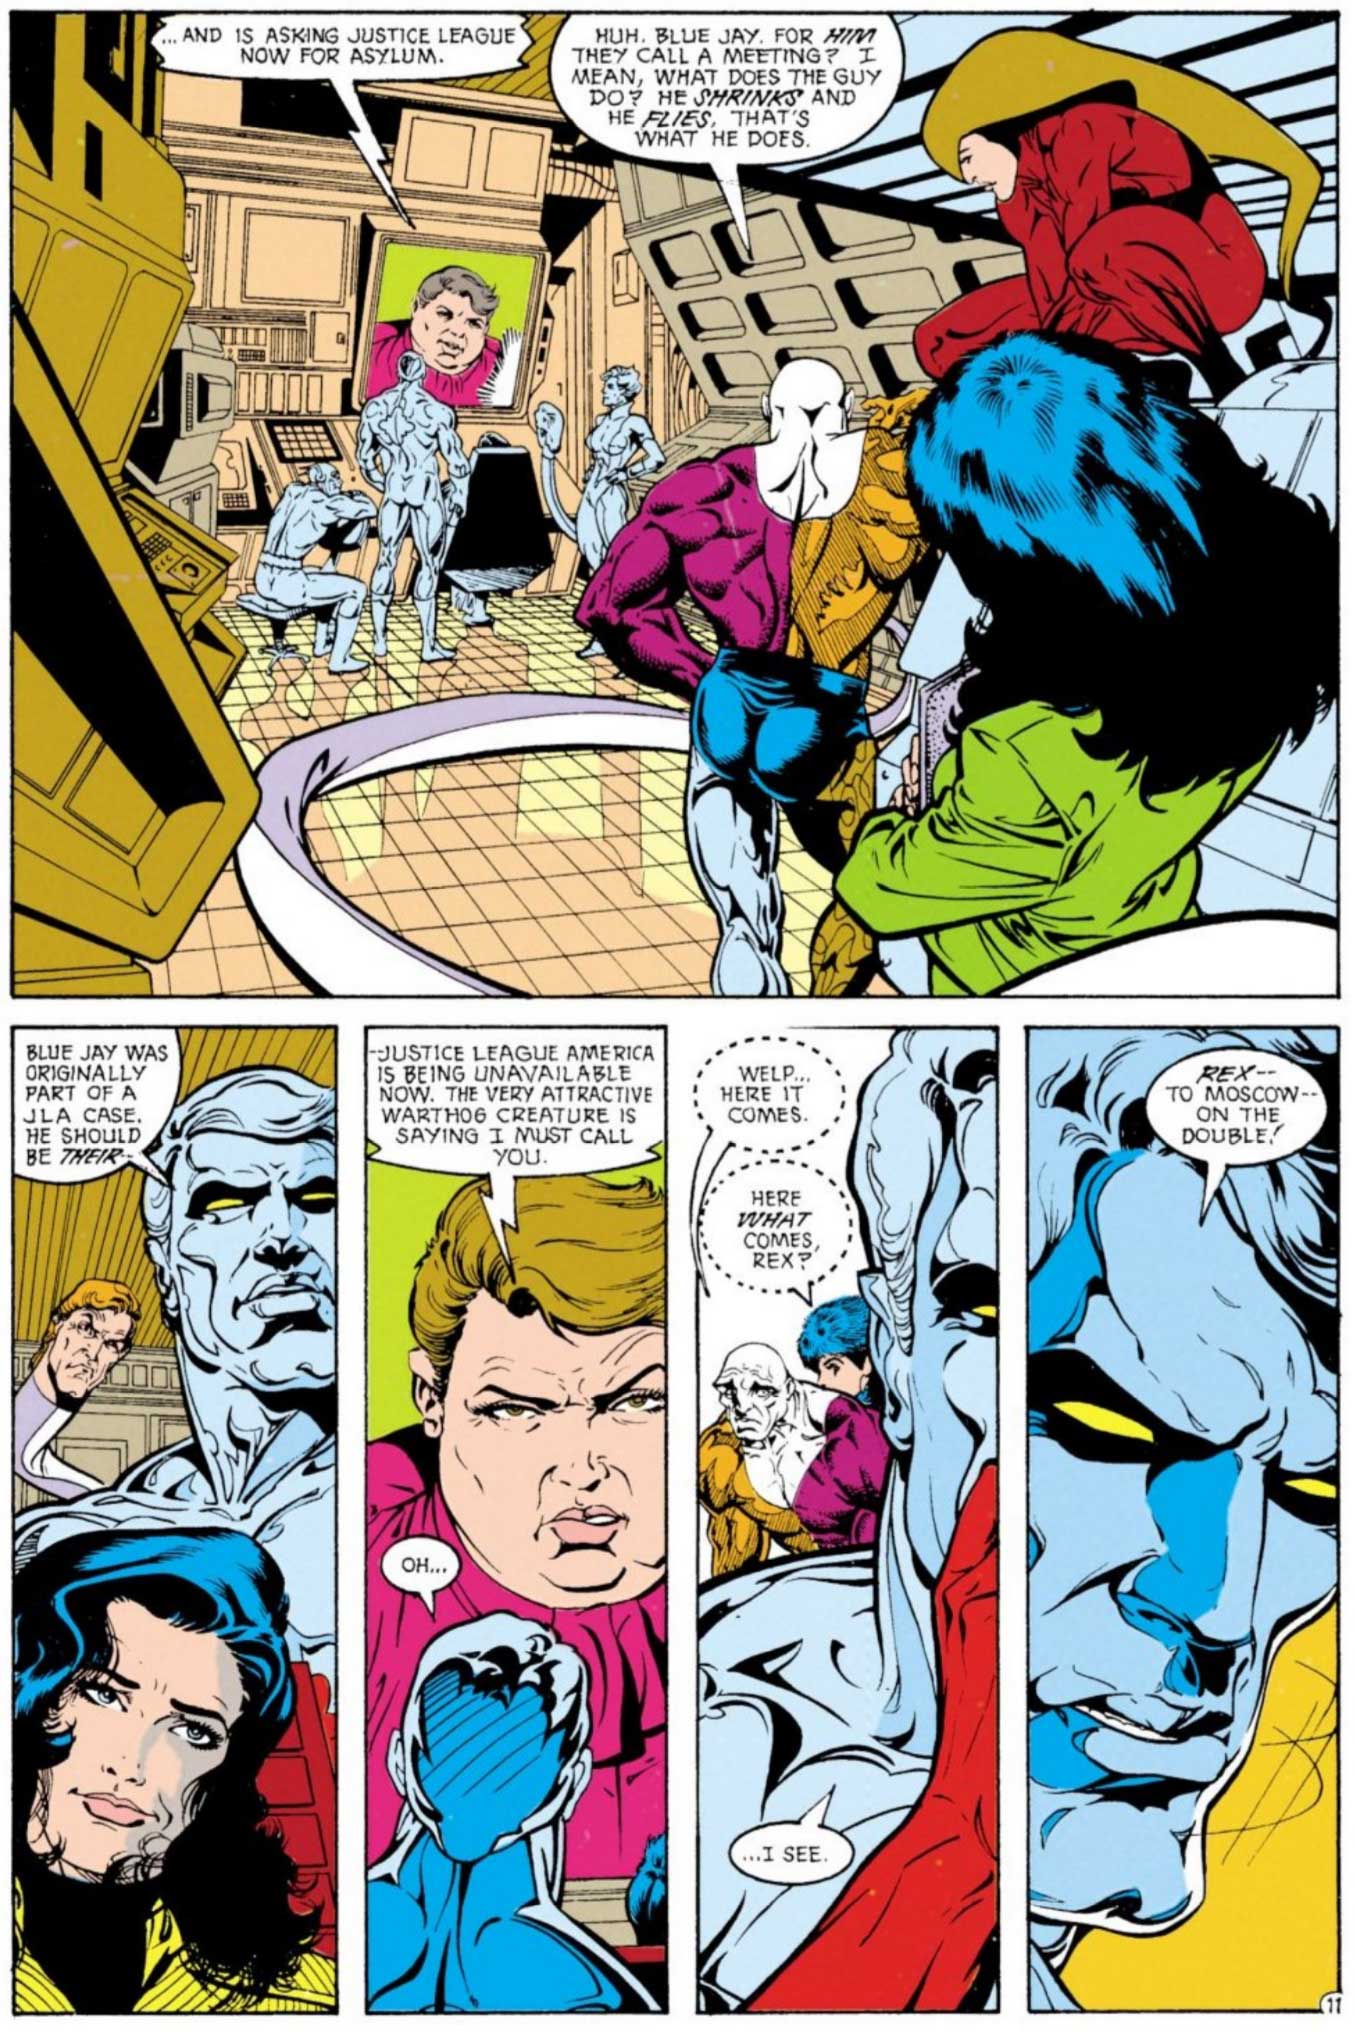 Justice League Europe #15 by Keith Giffen, Scripter, Bart Sears and Pablo Marcos